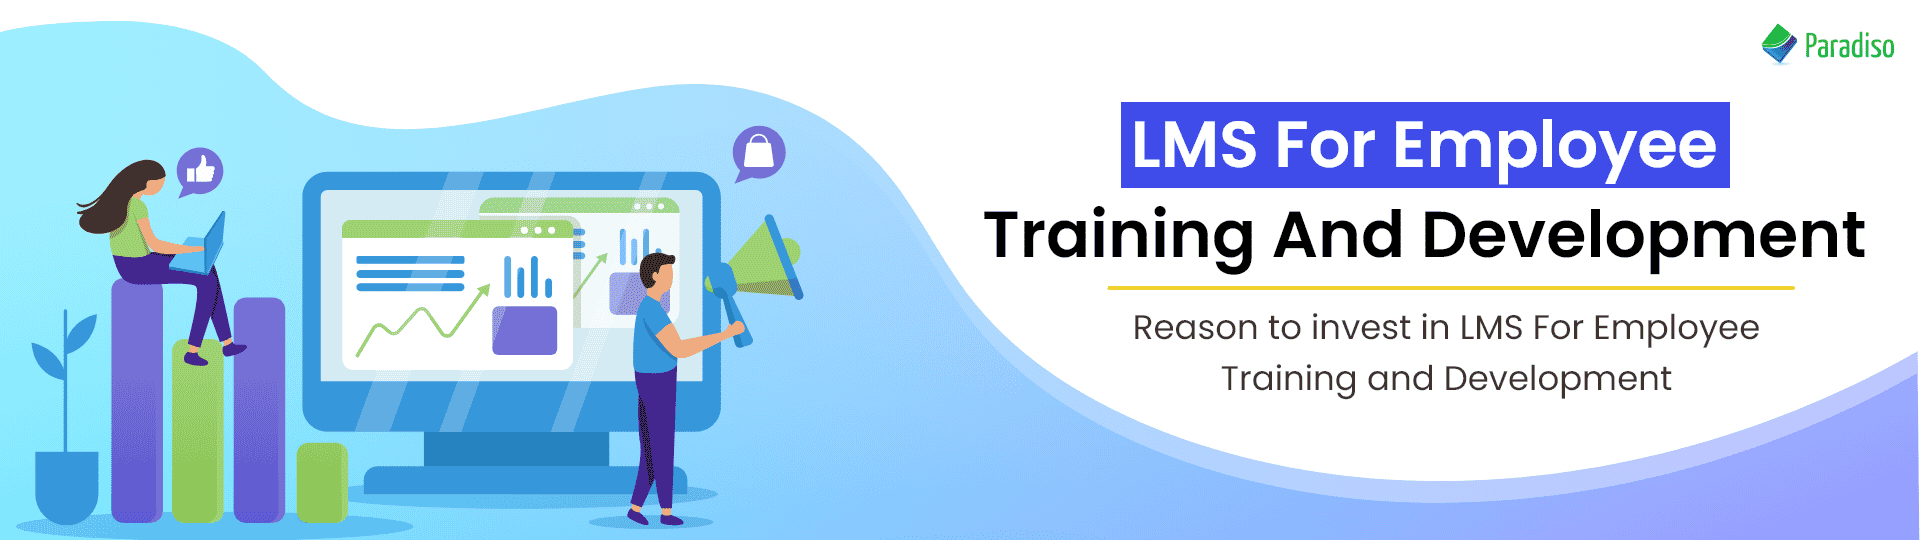 LMS For Employee Training And Development